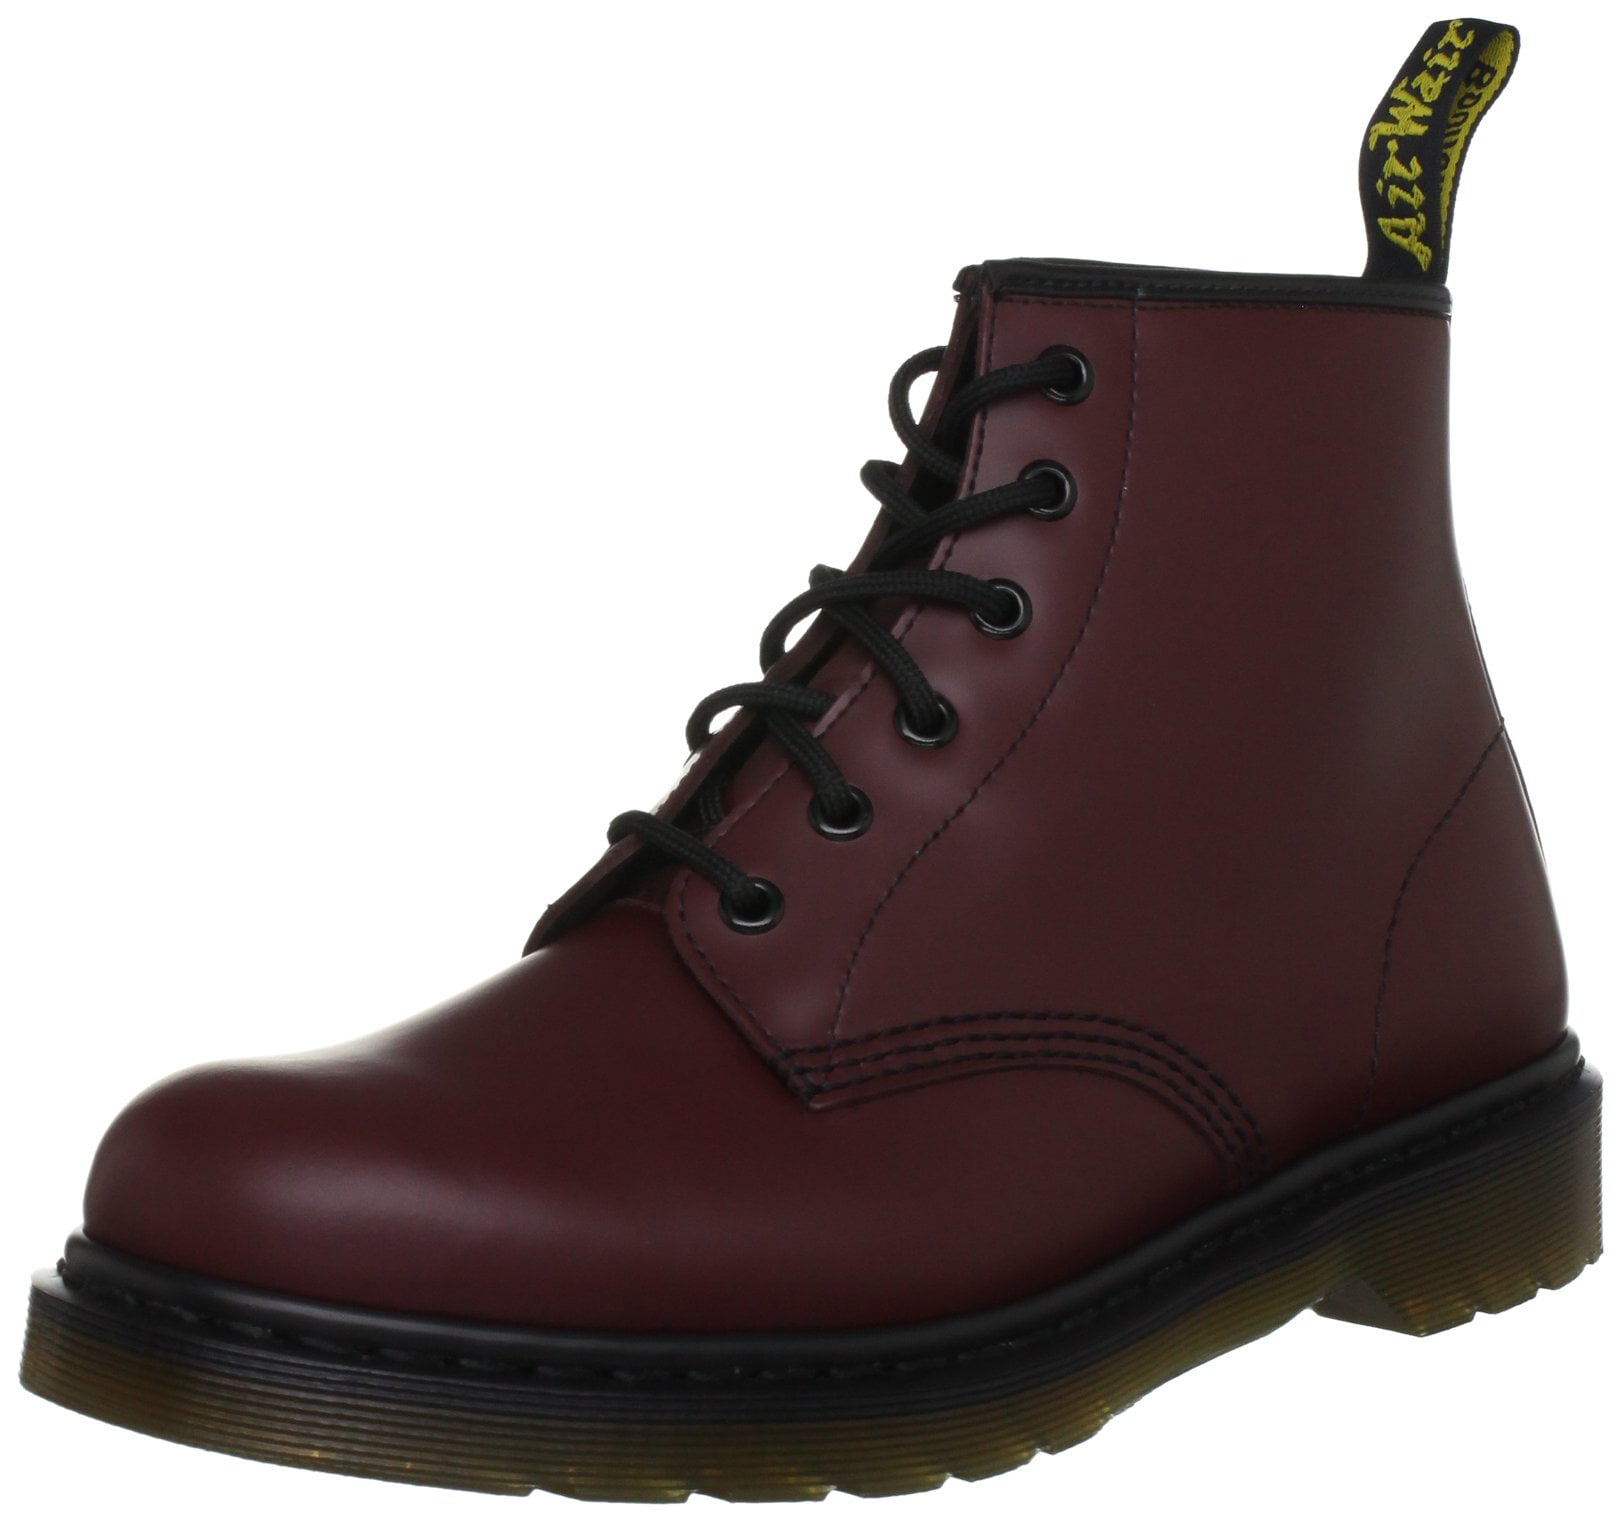 martens cherry red smooth